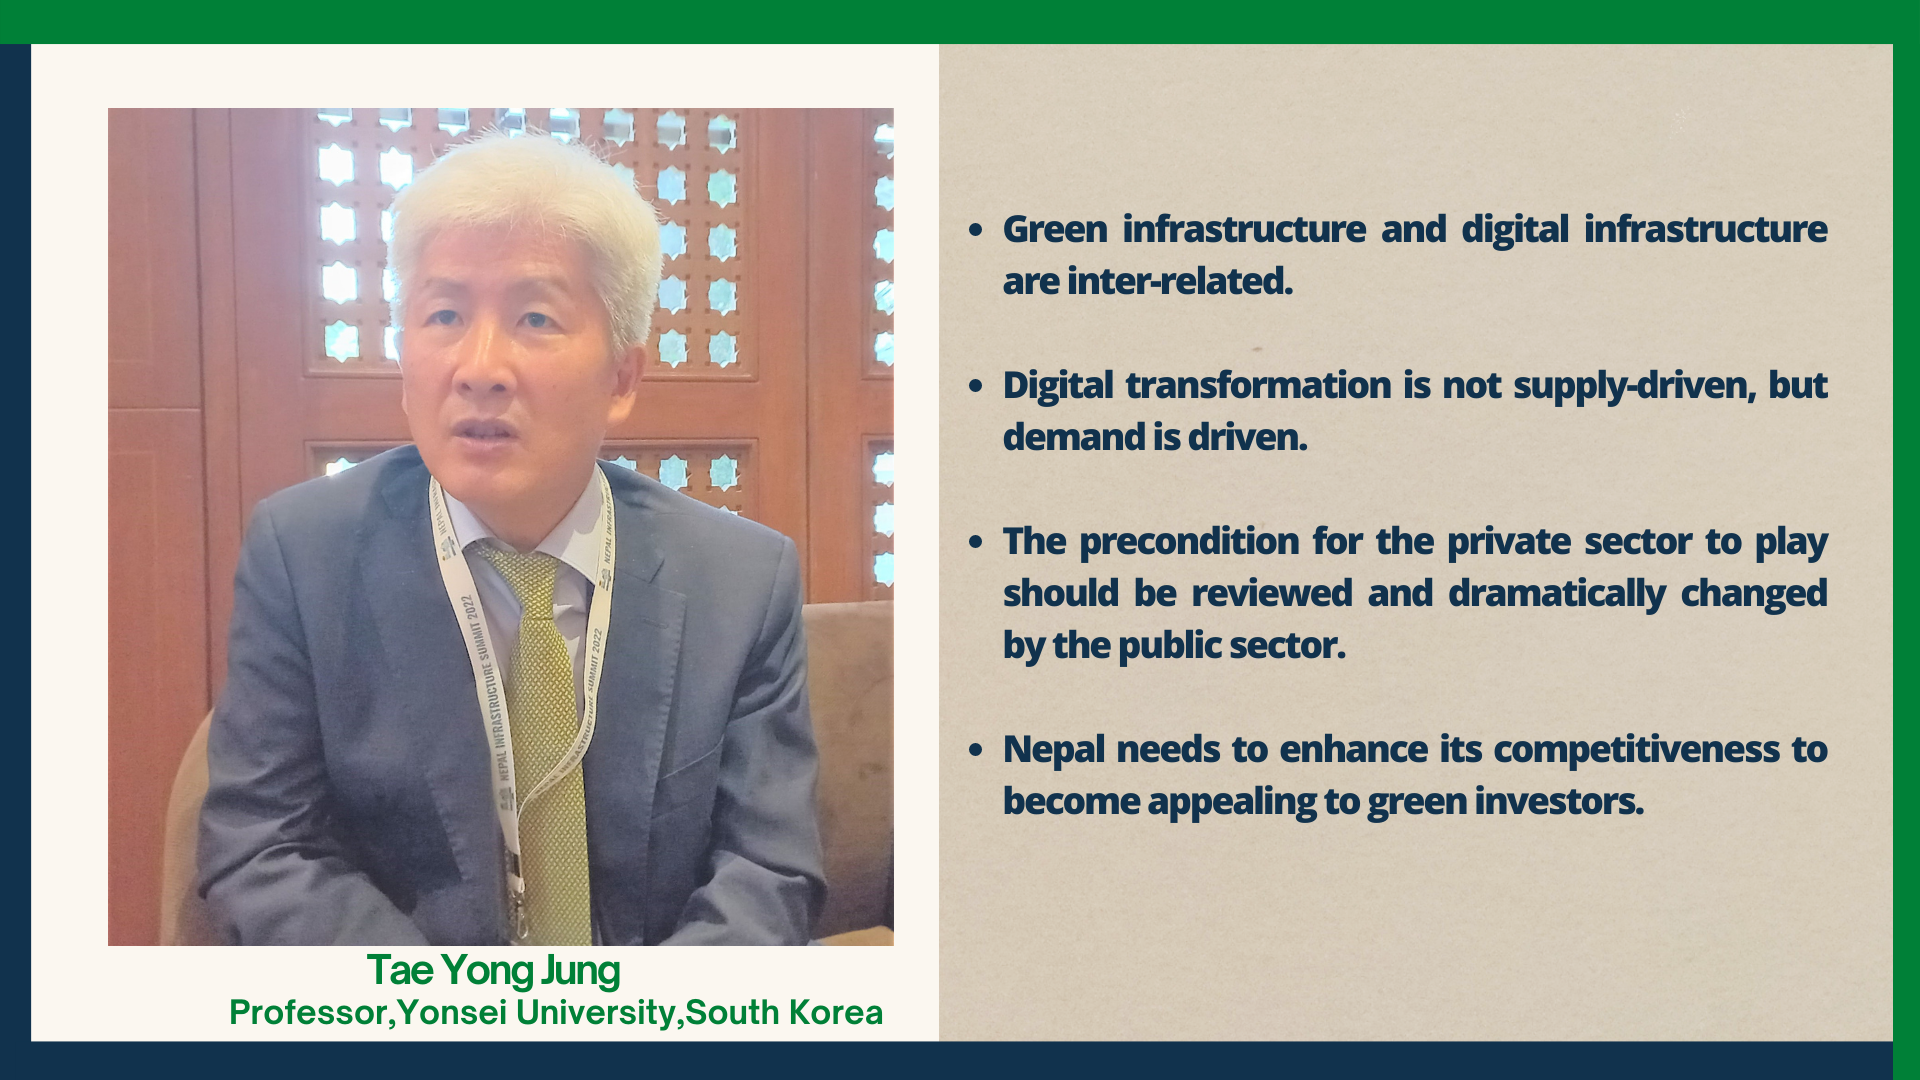 ‘Green infrastructure should be recombined with digital infrastructure’